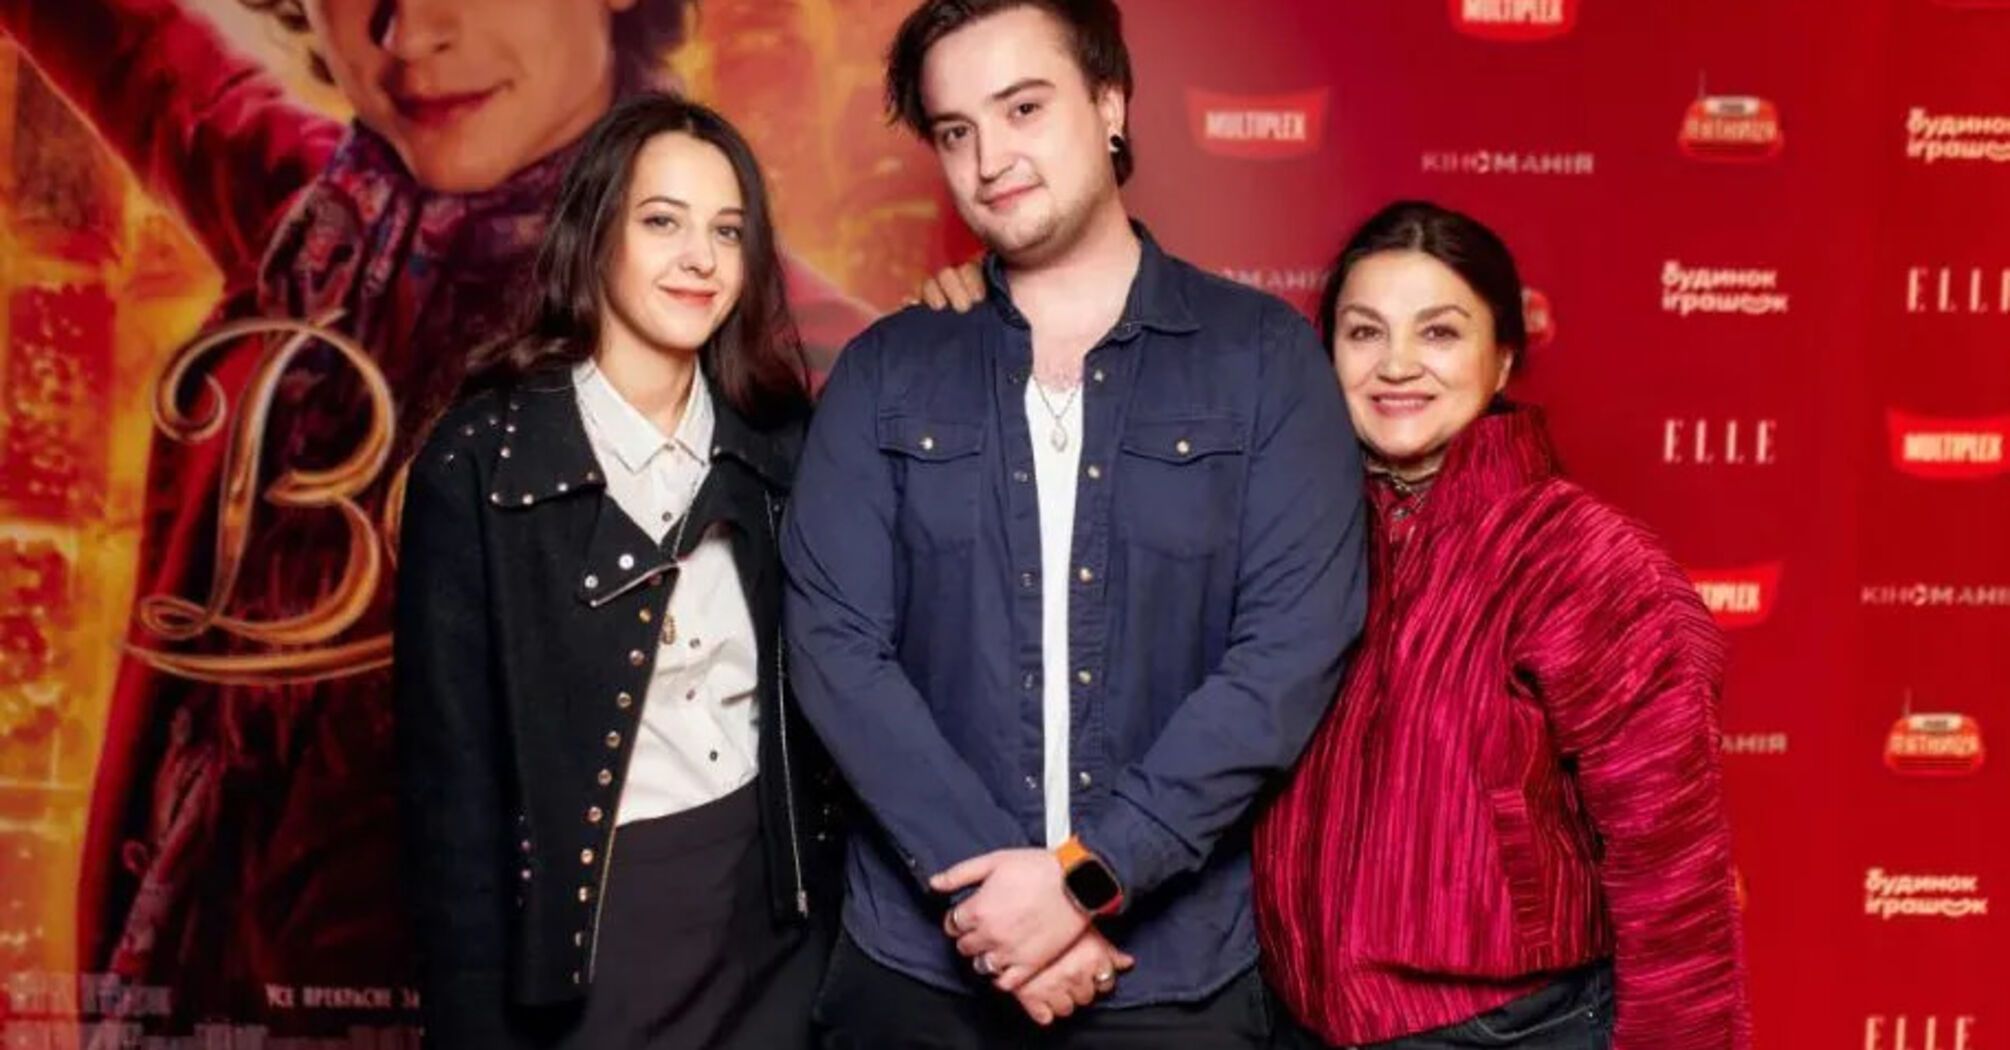 Natalia Sumska admits how working together with her son in the theater affected their relationship